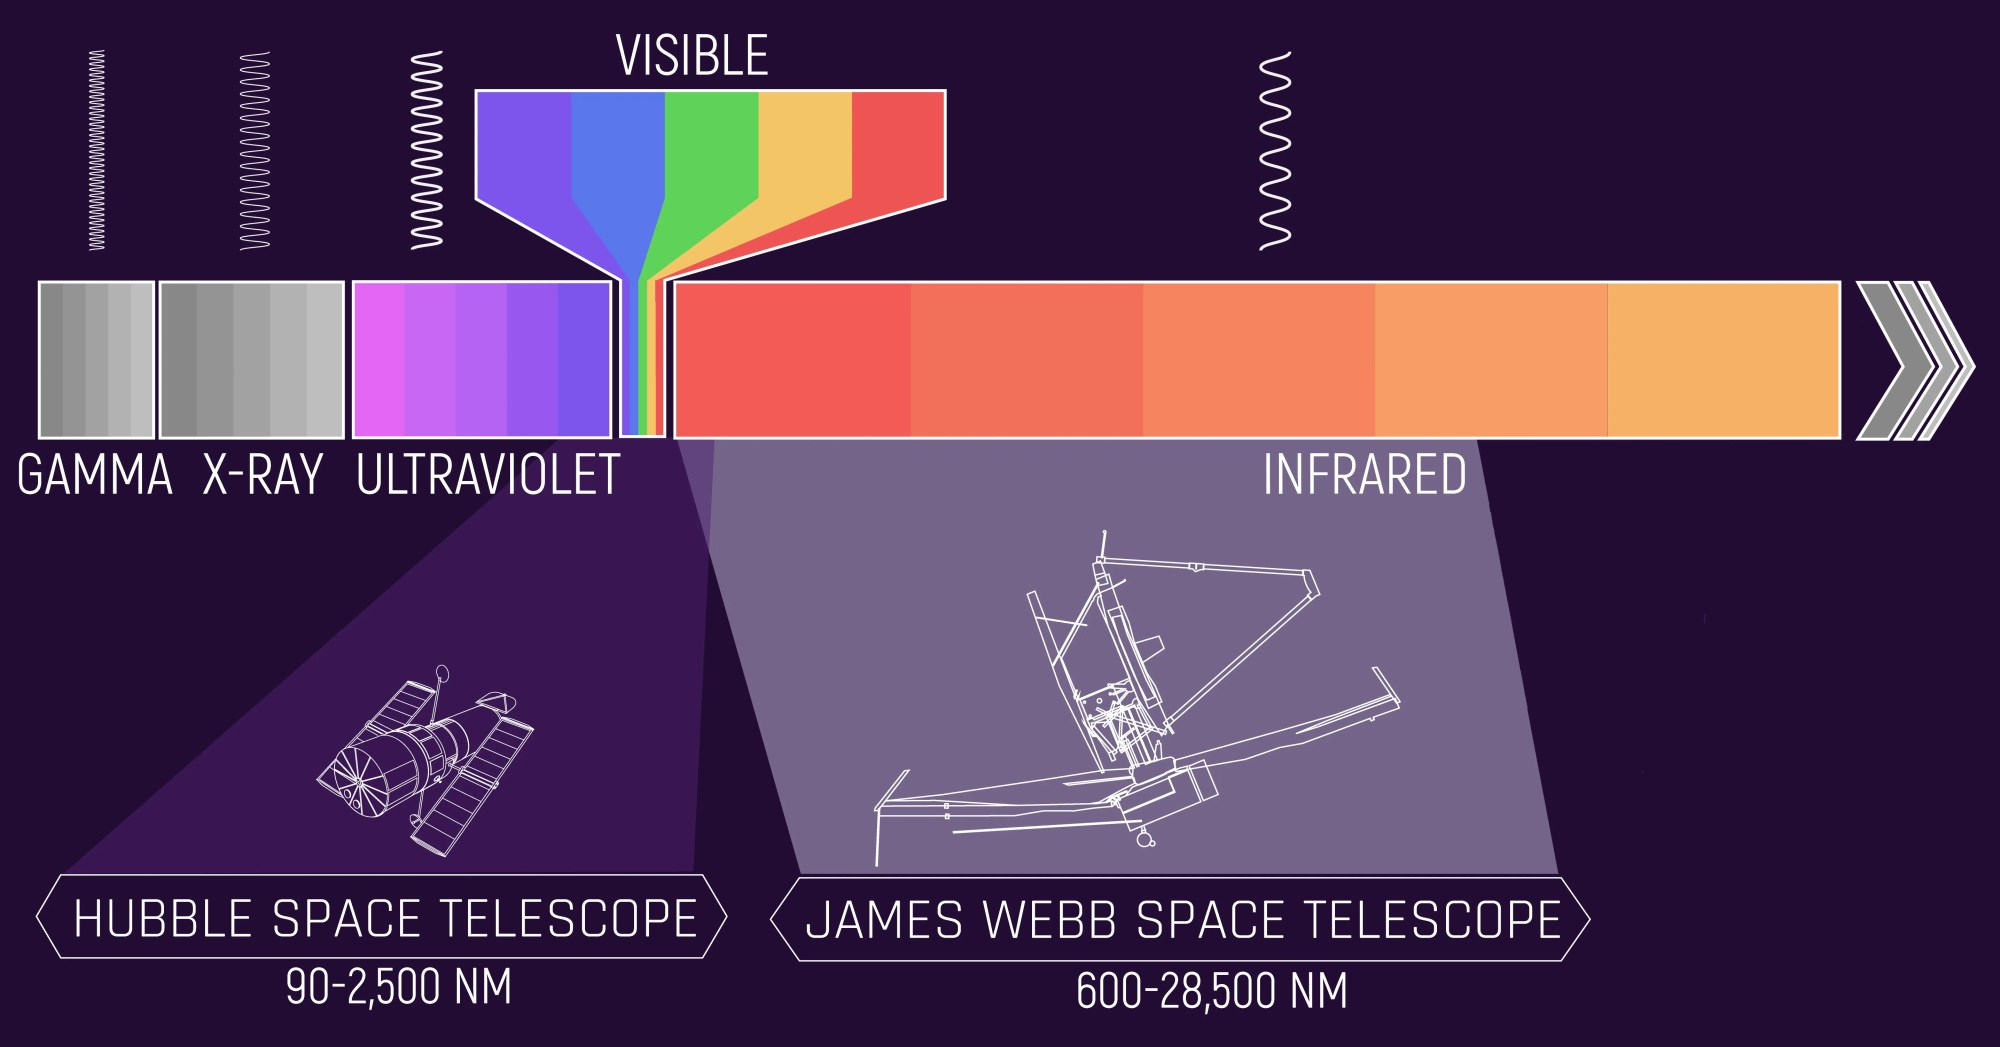 A diagram of the electromagnetic spectrum illustrating what wavelengths Hubble and Webb observe.